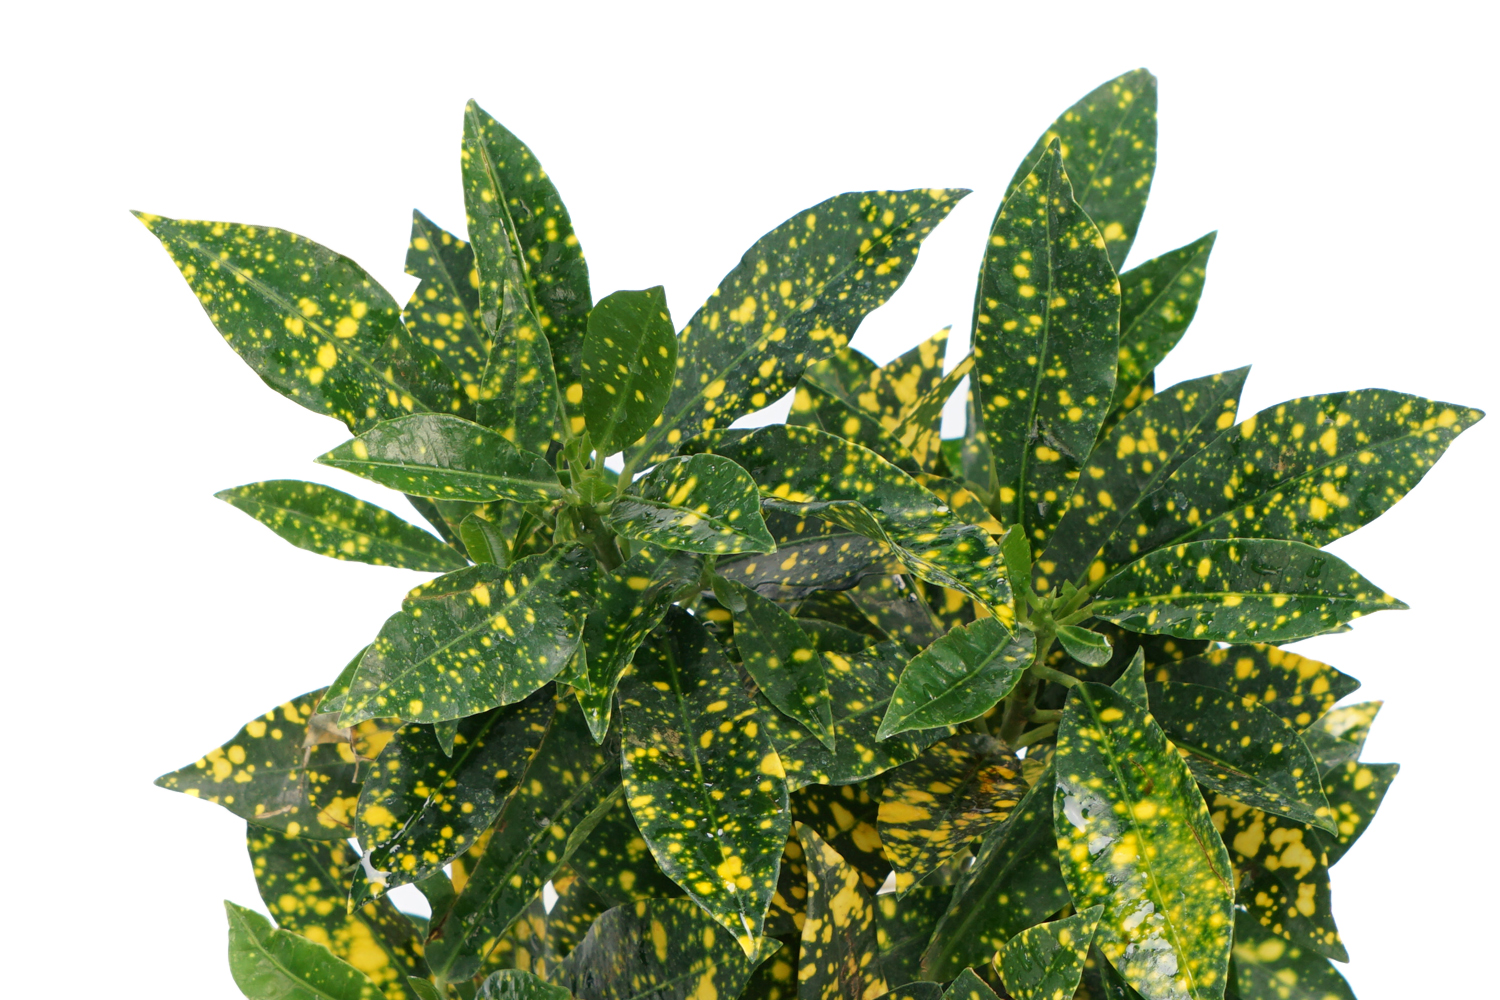 Buy Croton Golden Dust Plants , White Pots and seeds in Delhi NCR by the best online nursery shop Greendecor.